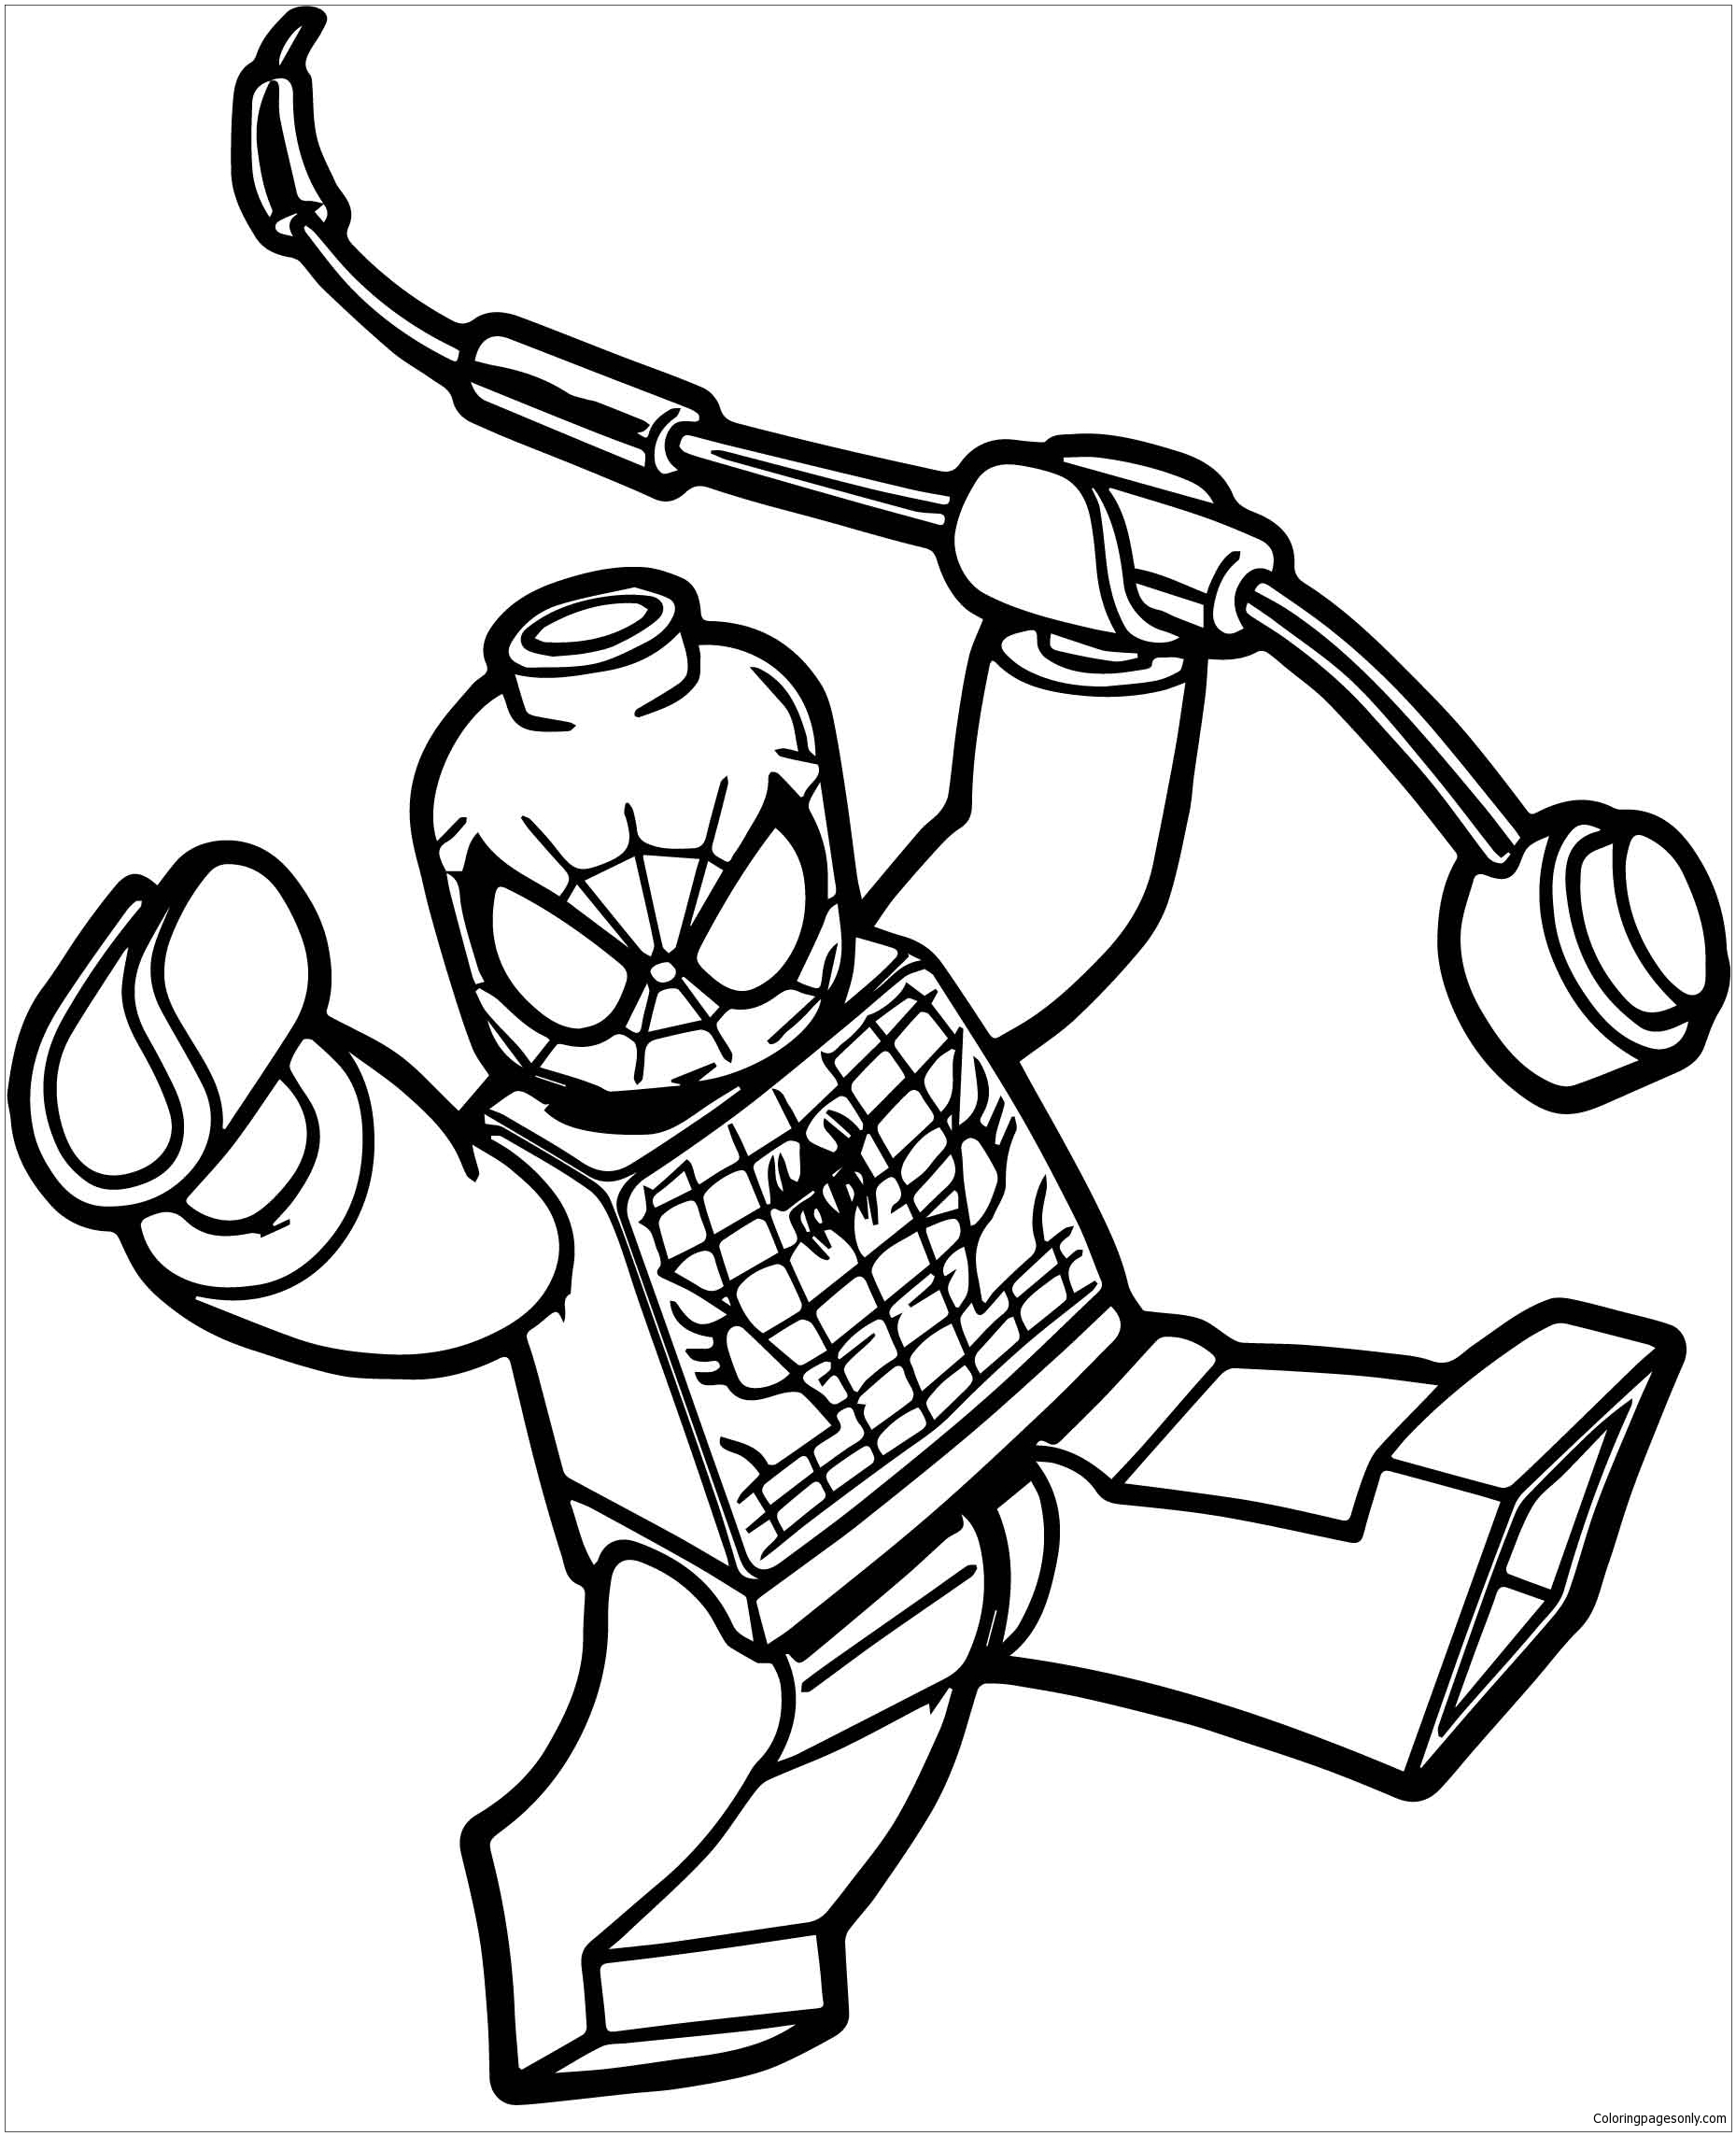 Box Spiderman Lego Spider Man Coloring Pages - Superhero Coloring Pages - Coloring  Pages For Kids And Adults